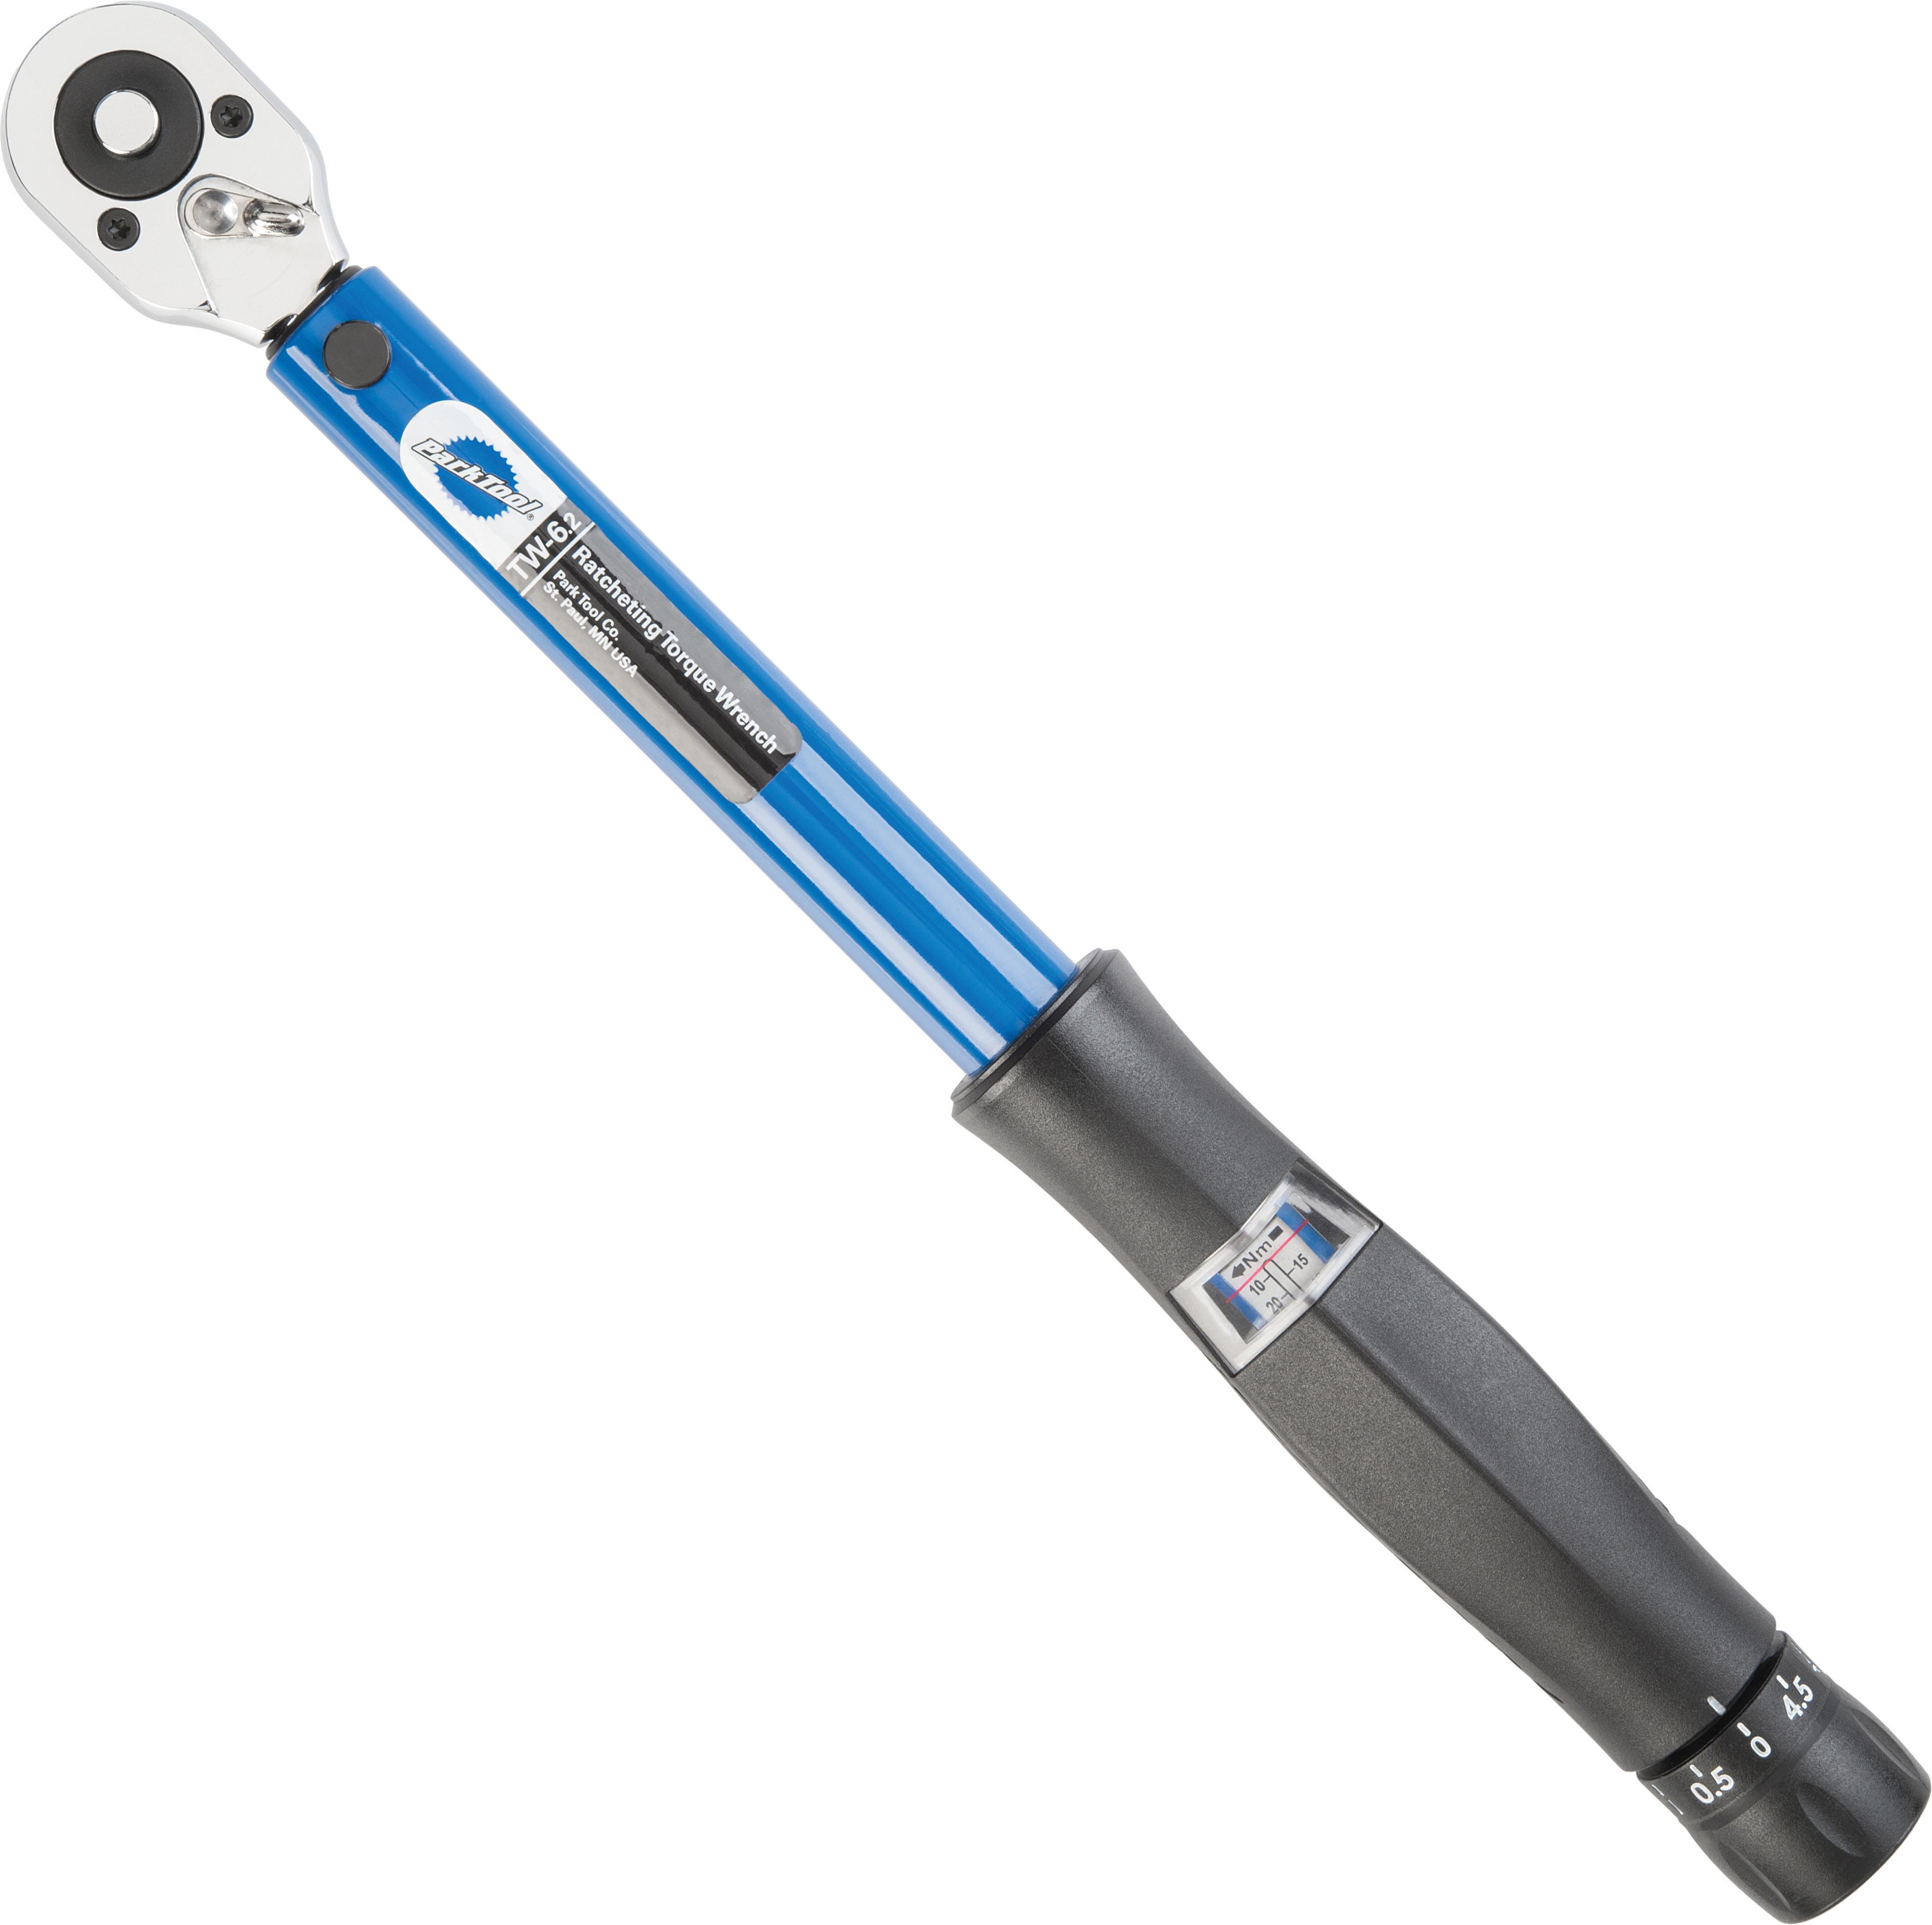 Park Tool TW-6.2 Ratcheting Click-Type Torque Wrench - 10 to 60 Nm